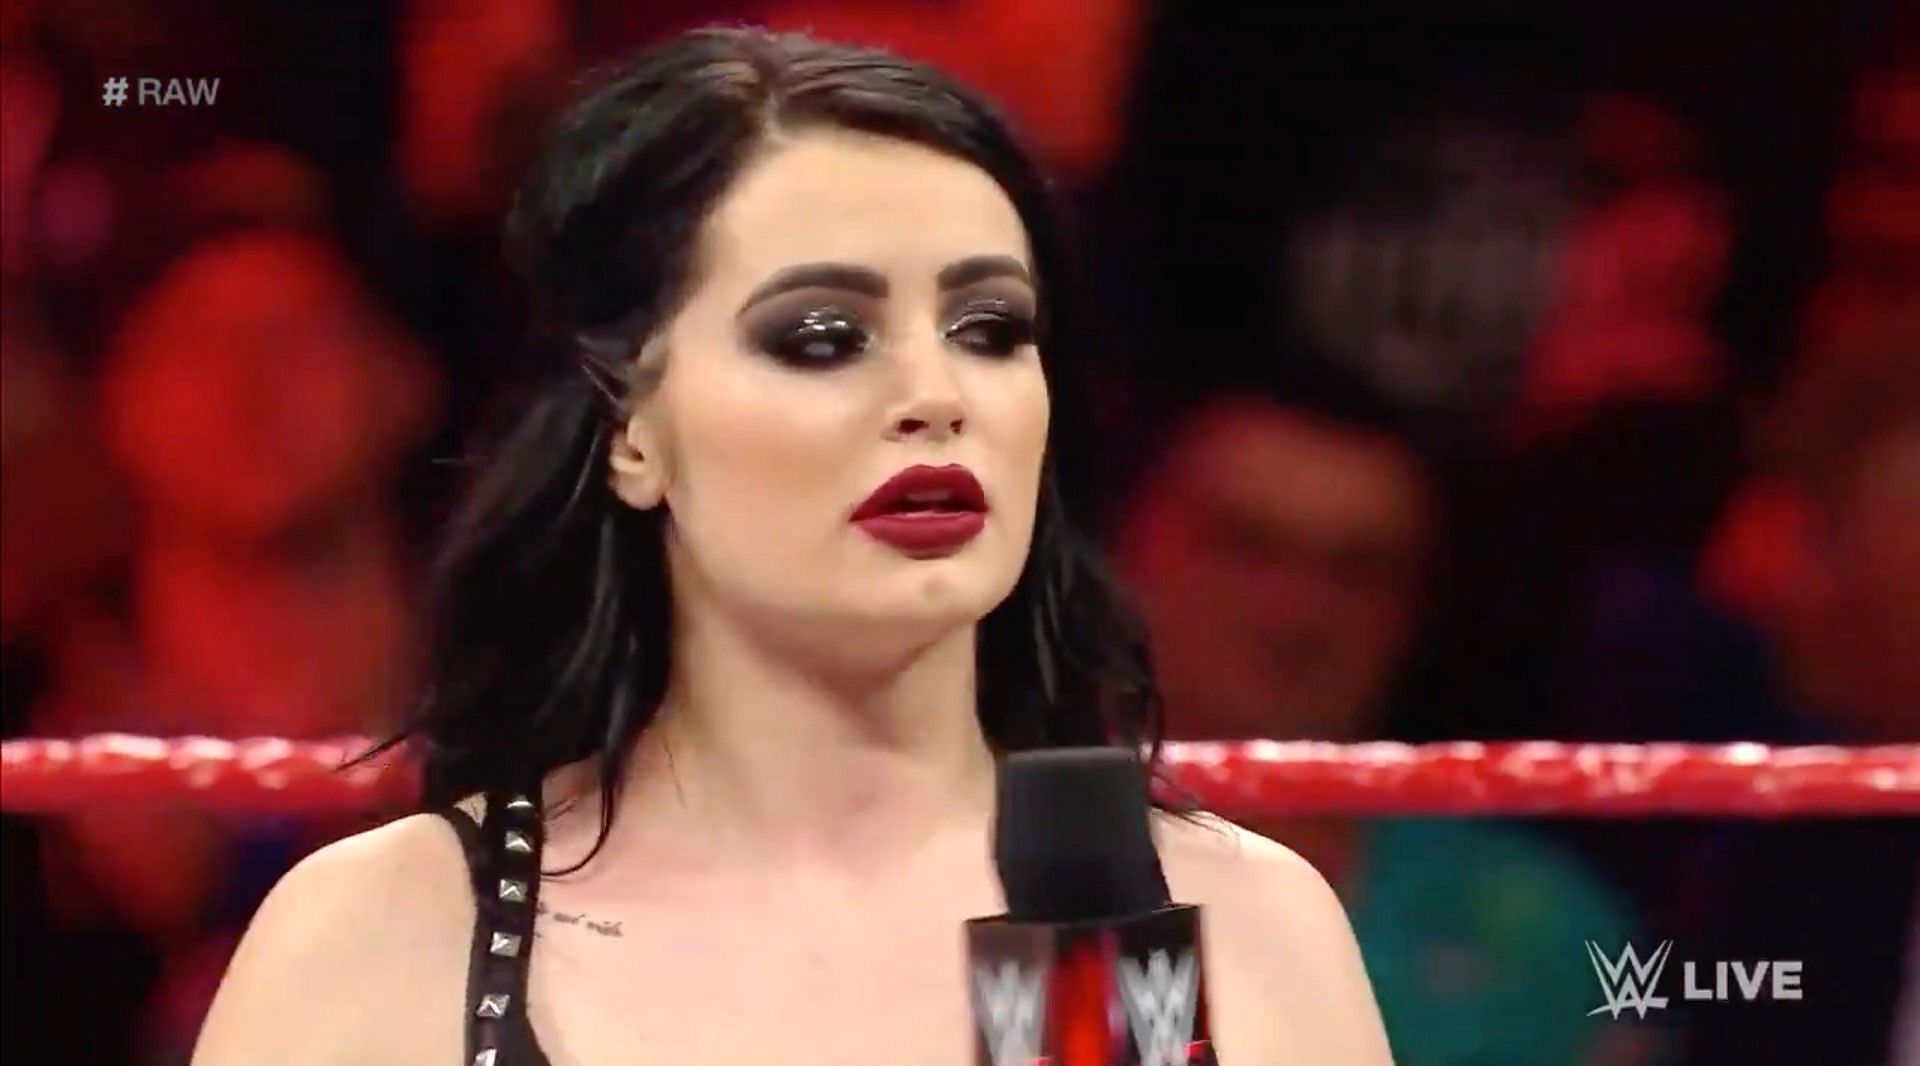 Saraya also talked about the superstar who injured her